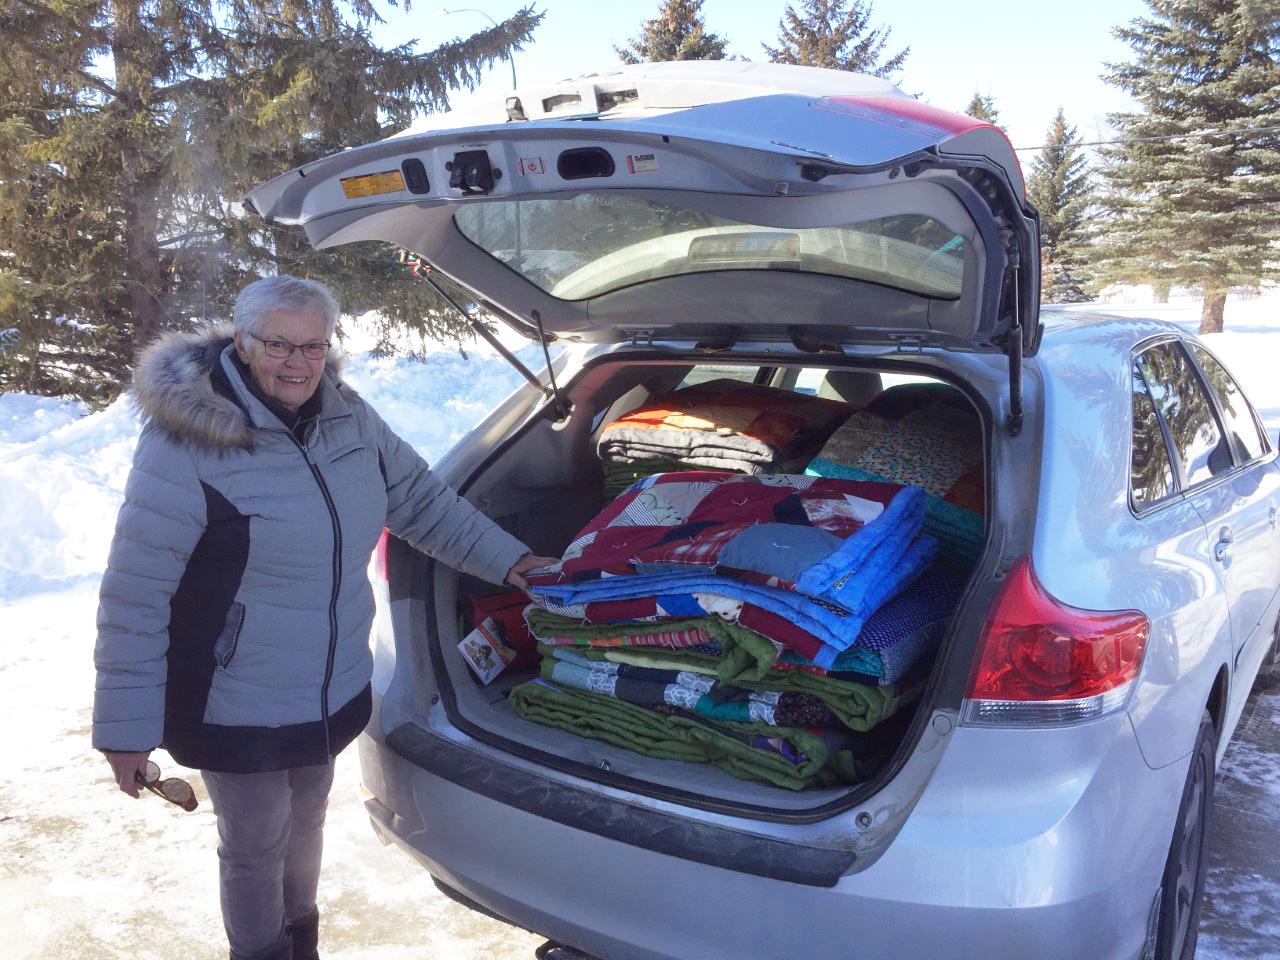 A woman in a winter coat stands by the open truck of a hatchback car. Inside the car are piles of colorful comforters.